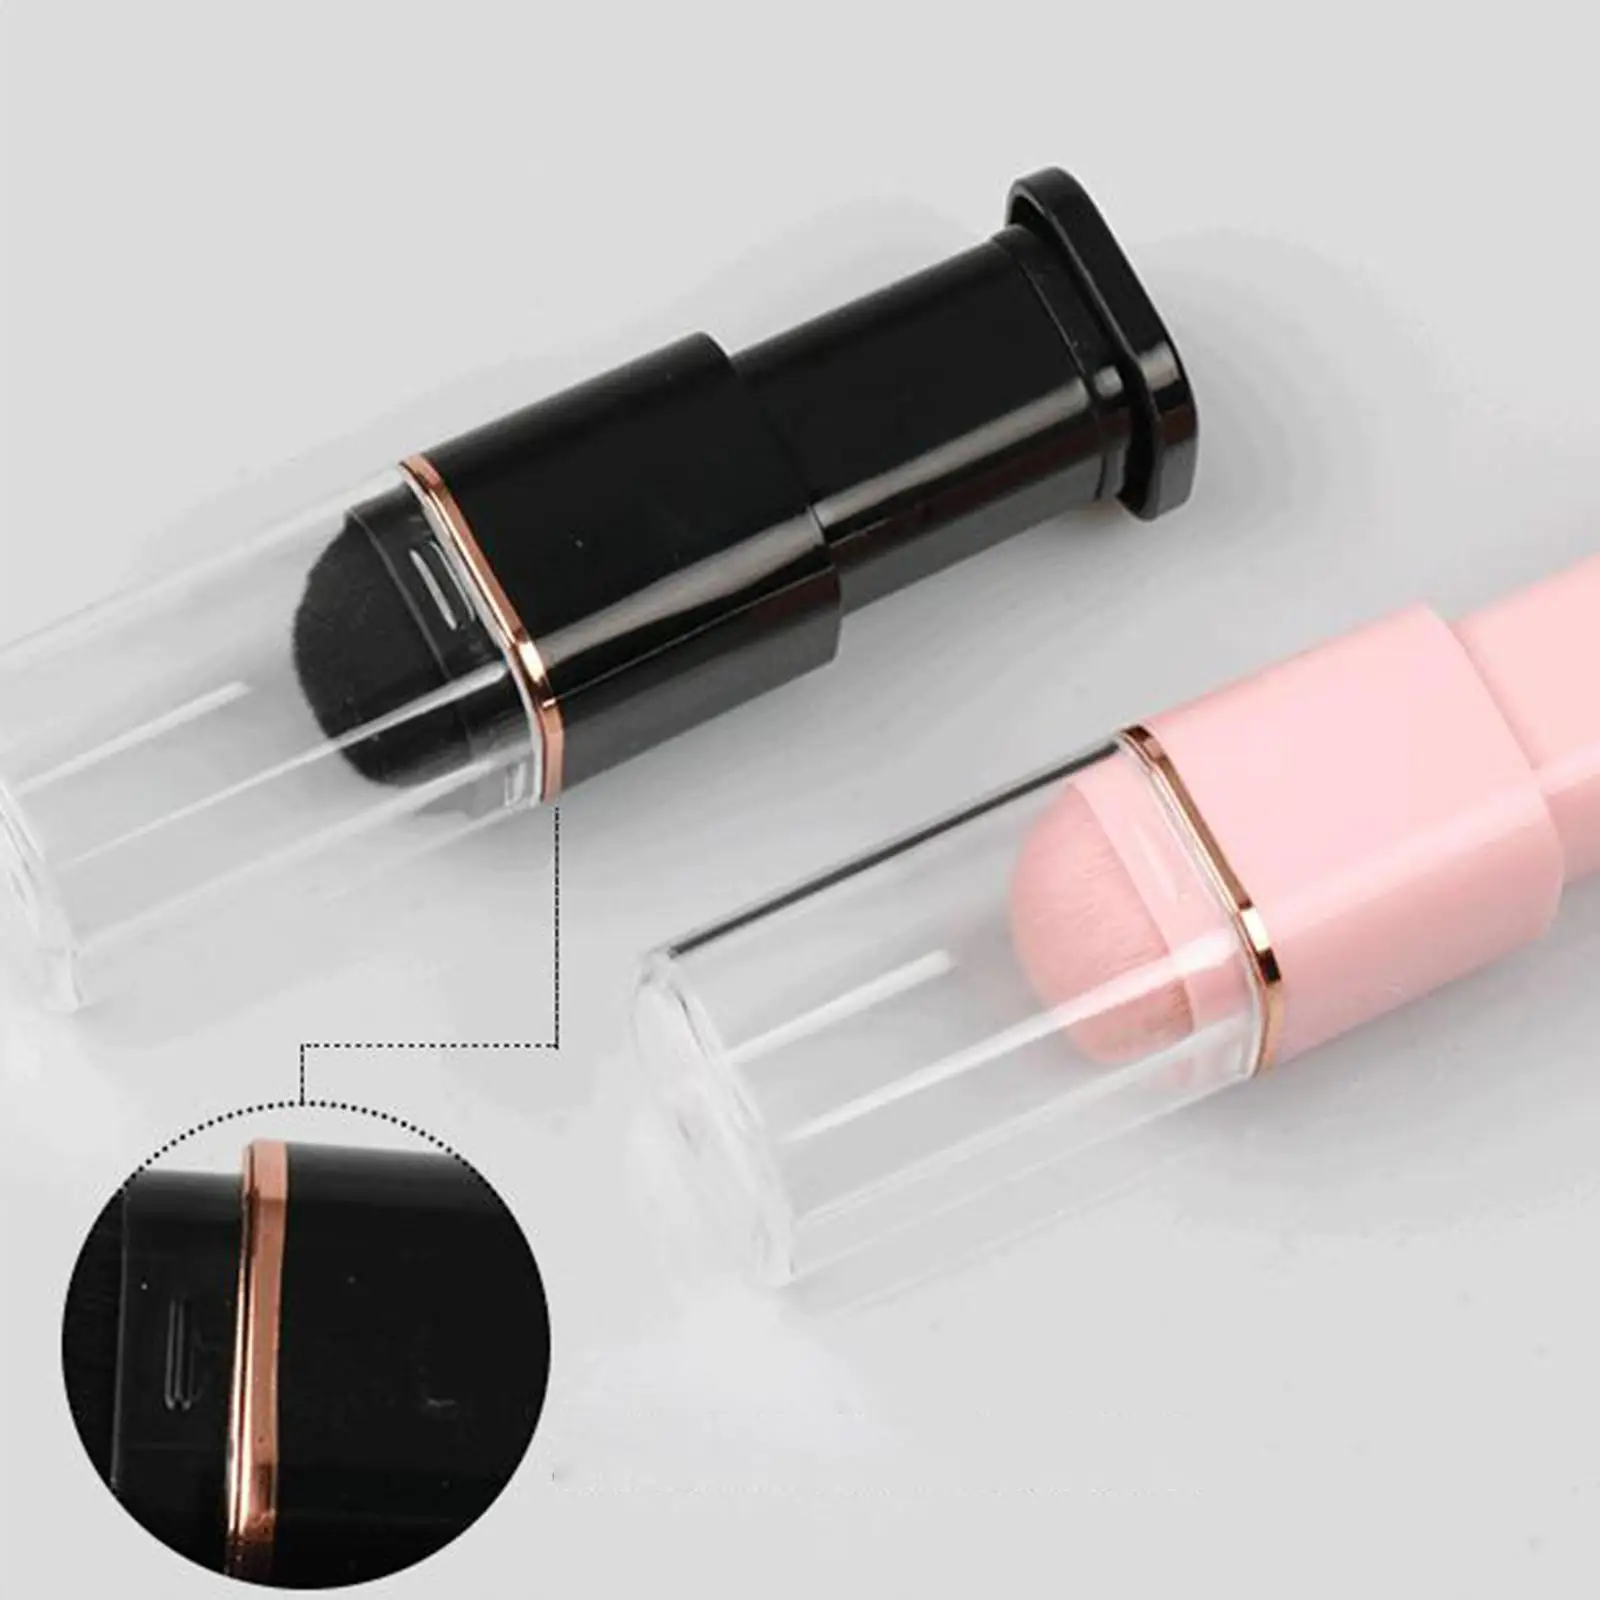 Portable Retractable Makeup Brush Travel with Cover Small Face Blush Brush for Loose Powder Highlighter Buffing